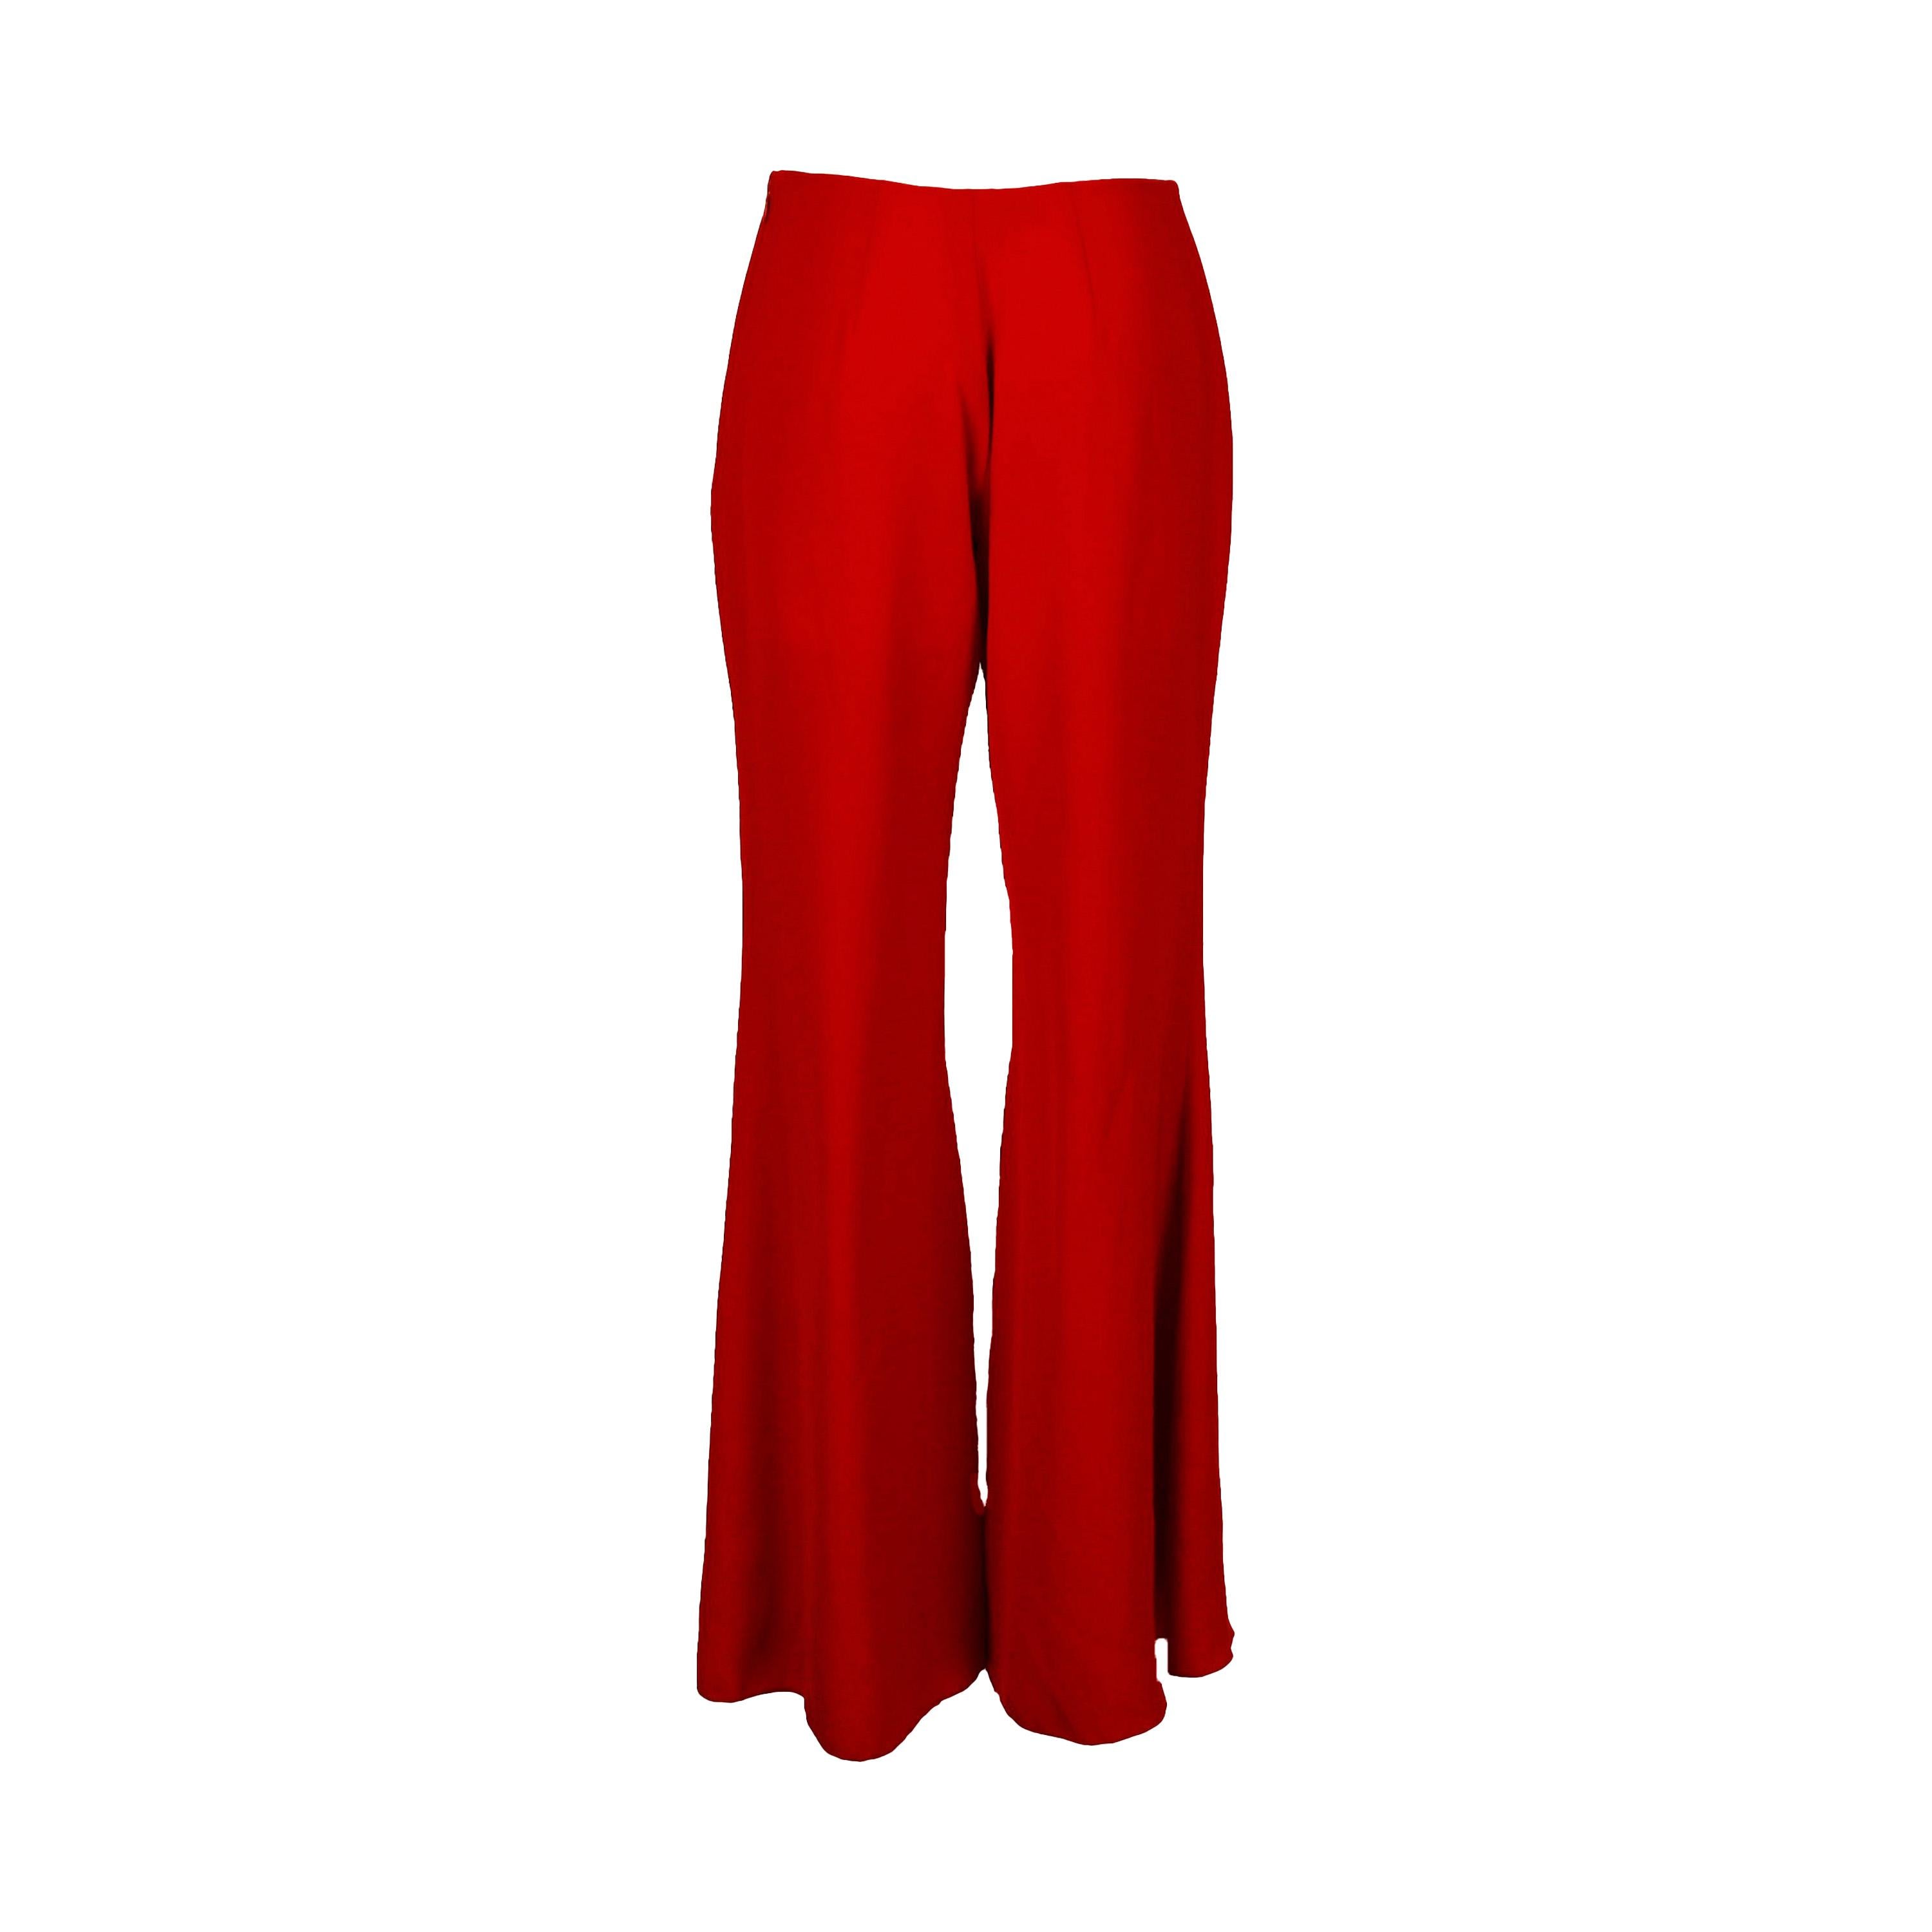 These chic Blumarine flared trousers make a statement with its bold red color, featuring a flared silhouette with a chic ruffled slit on the front, revealing a lightweight leopard print panel. A side zipper ensures a comfortable fit.

Remarks: There